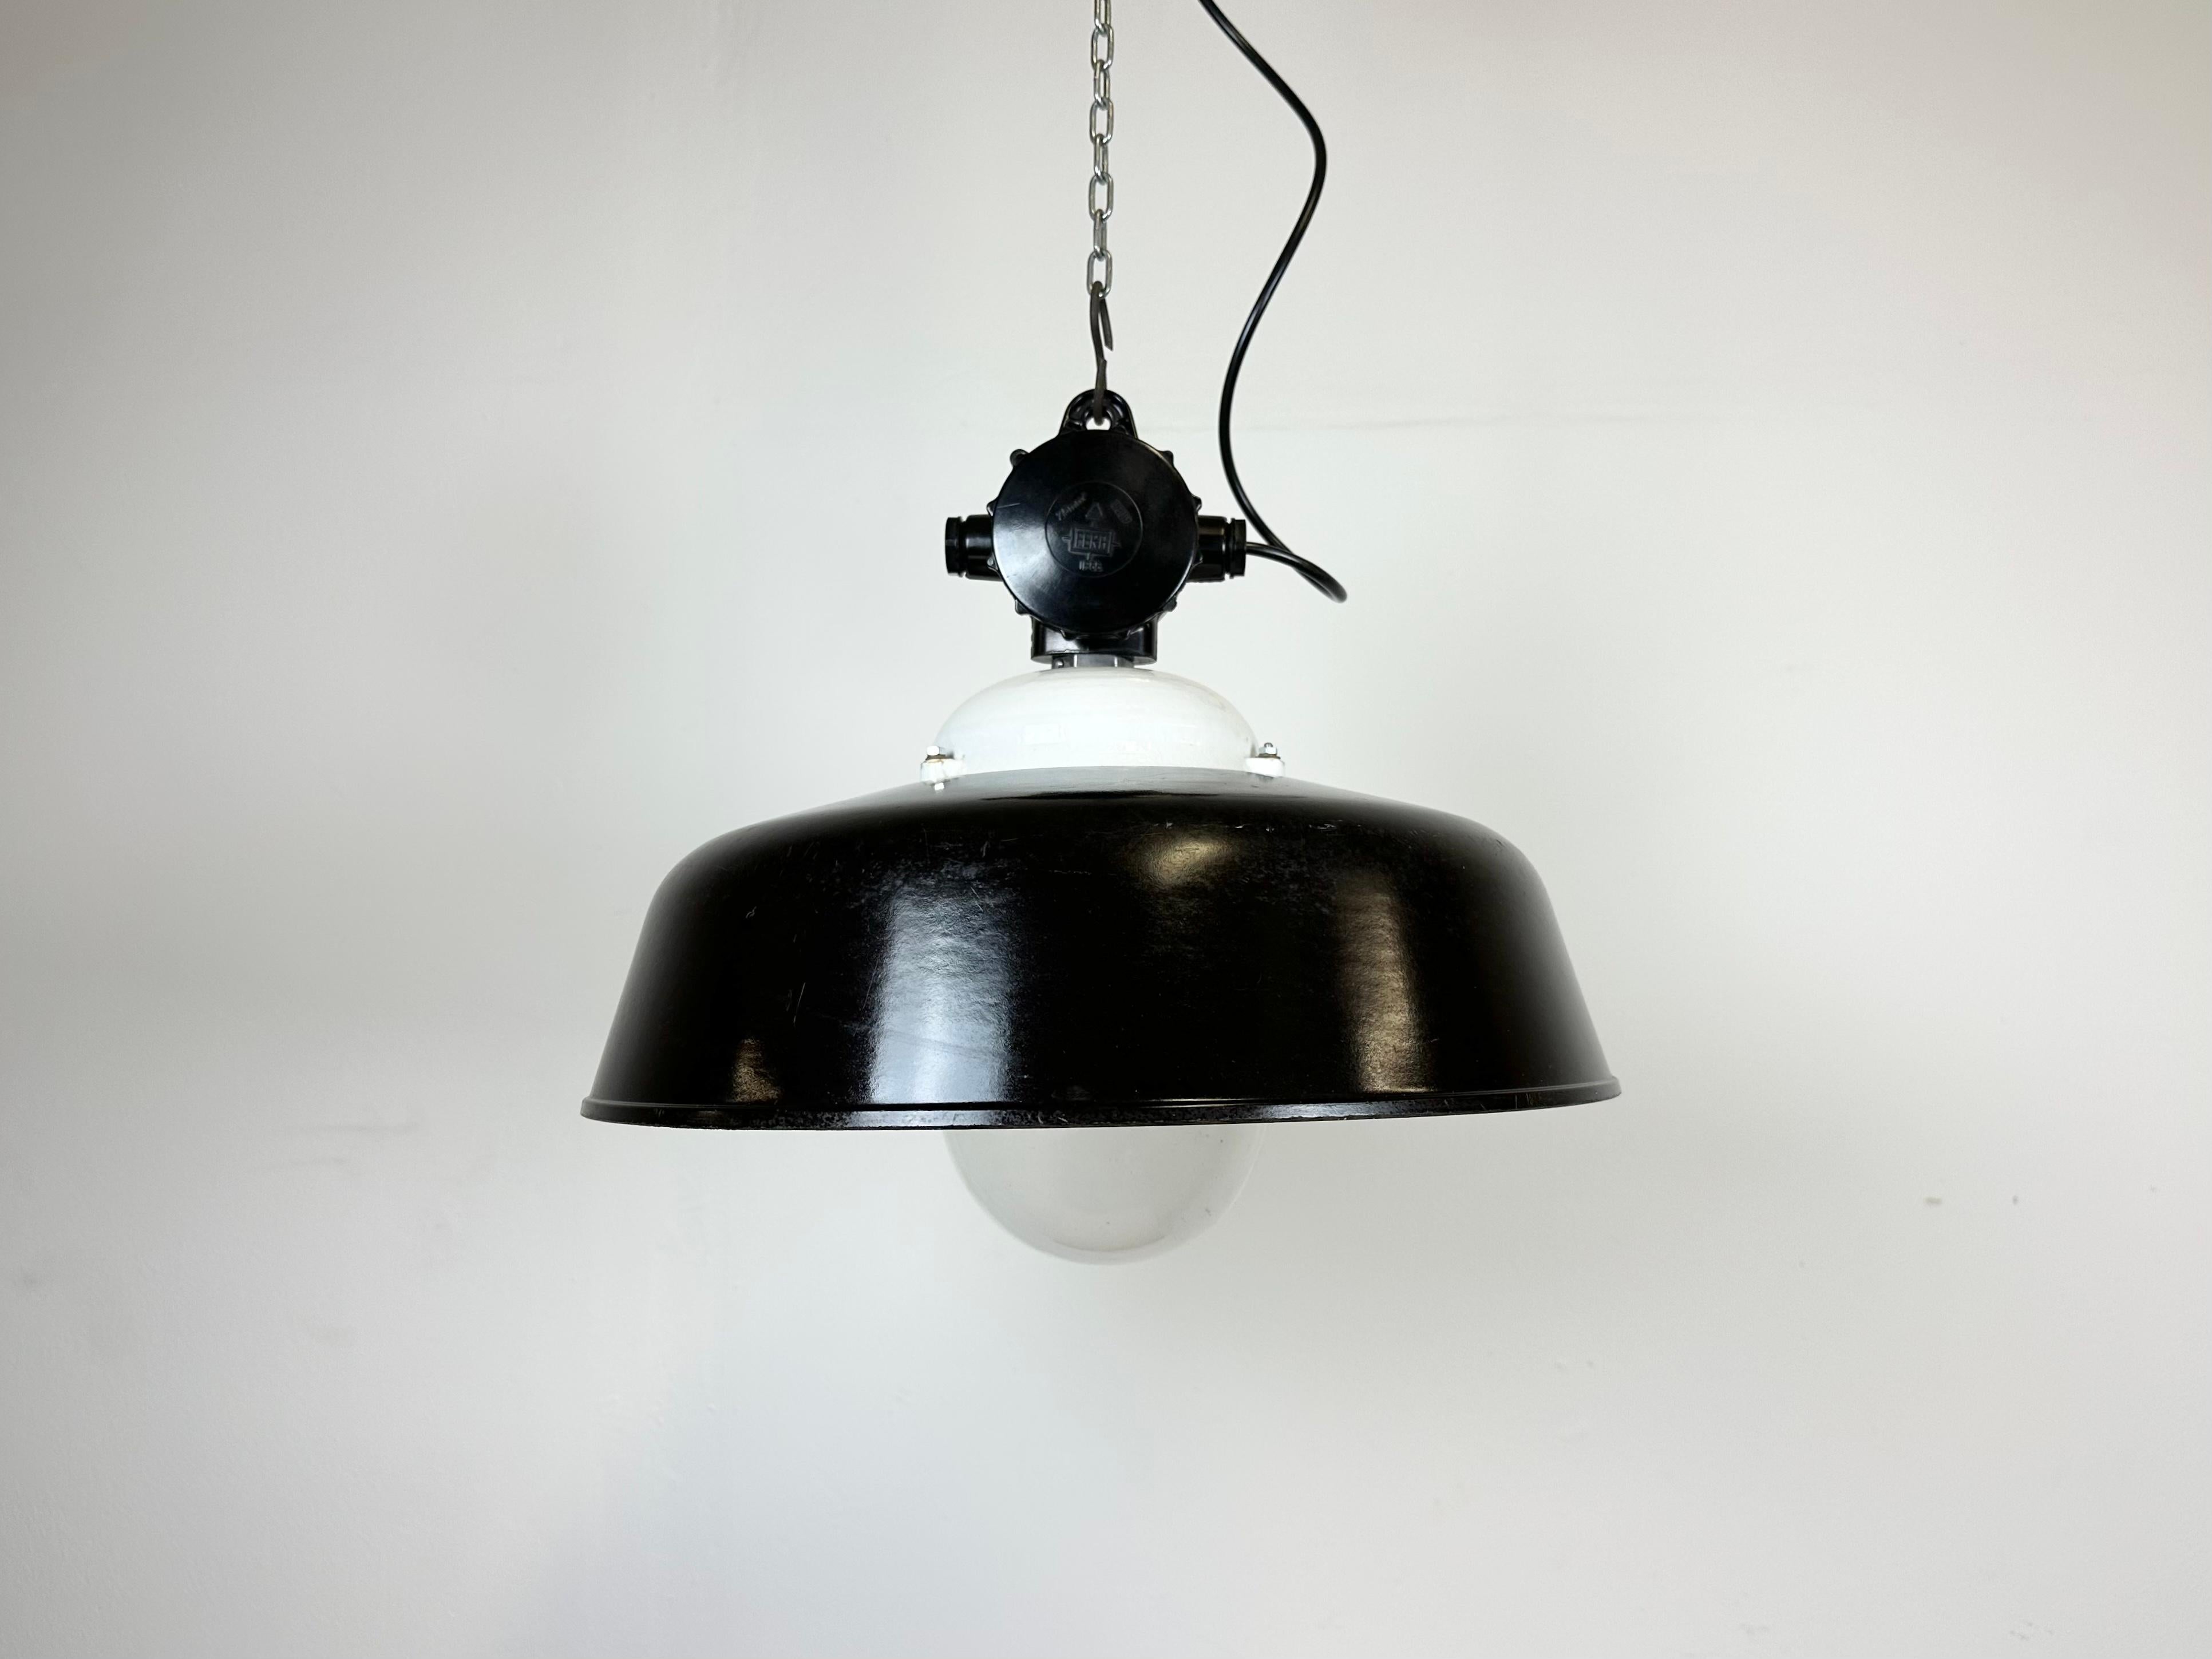 Industrial factory light made in Germany during the 1950s. It features a black enamel shade with white interior, a porcelain top with bakelite box and clear glass cover.The socket requires E 27/ E 26 lightbulbs. New wire.The weight of the lamp is